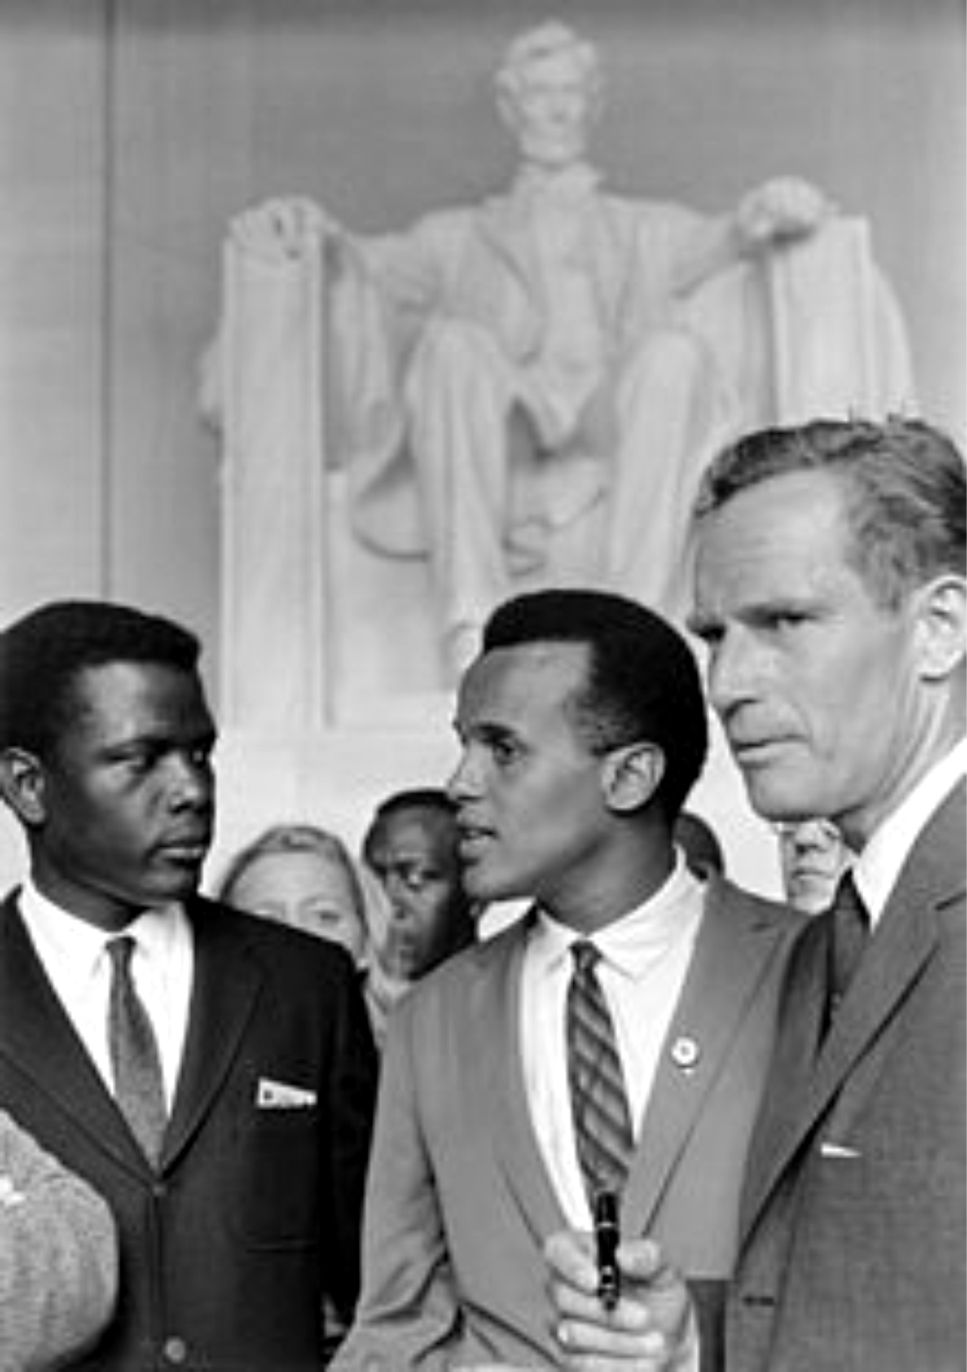 Sidney Poitier, Harry Belafonte, and Charlelton Heston at the Lincoln Memorial, August 28, 1963